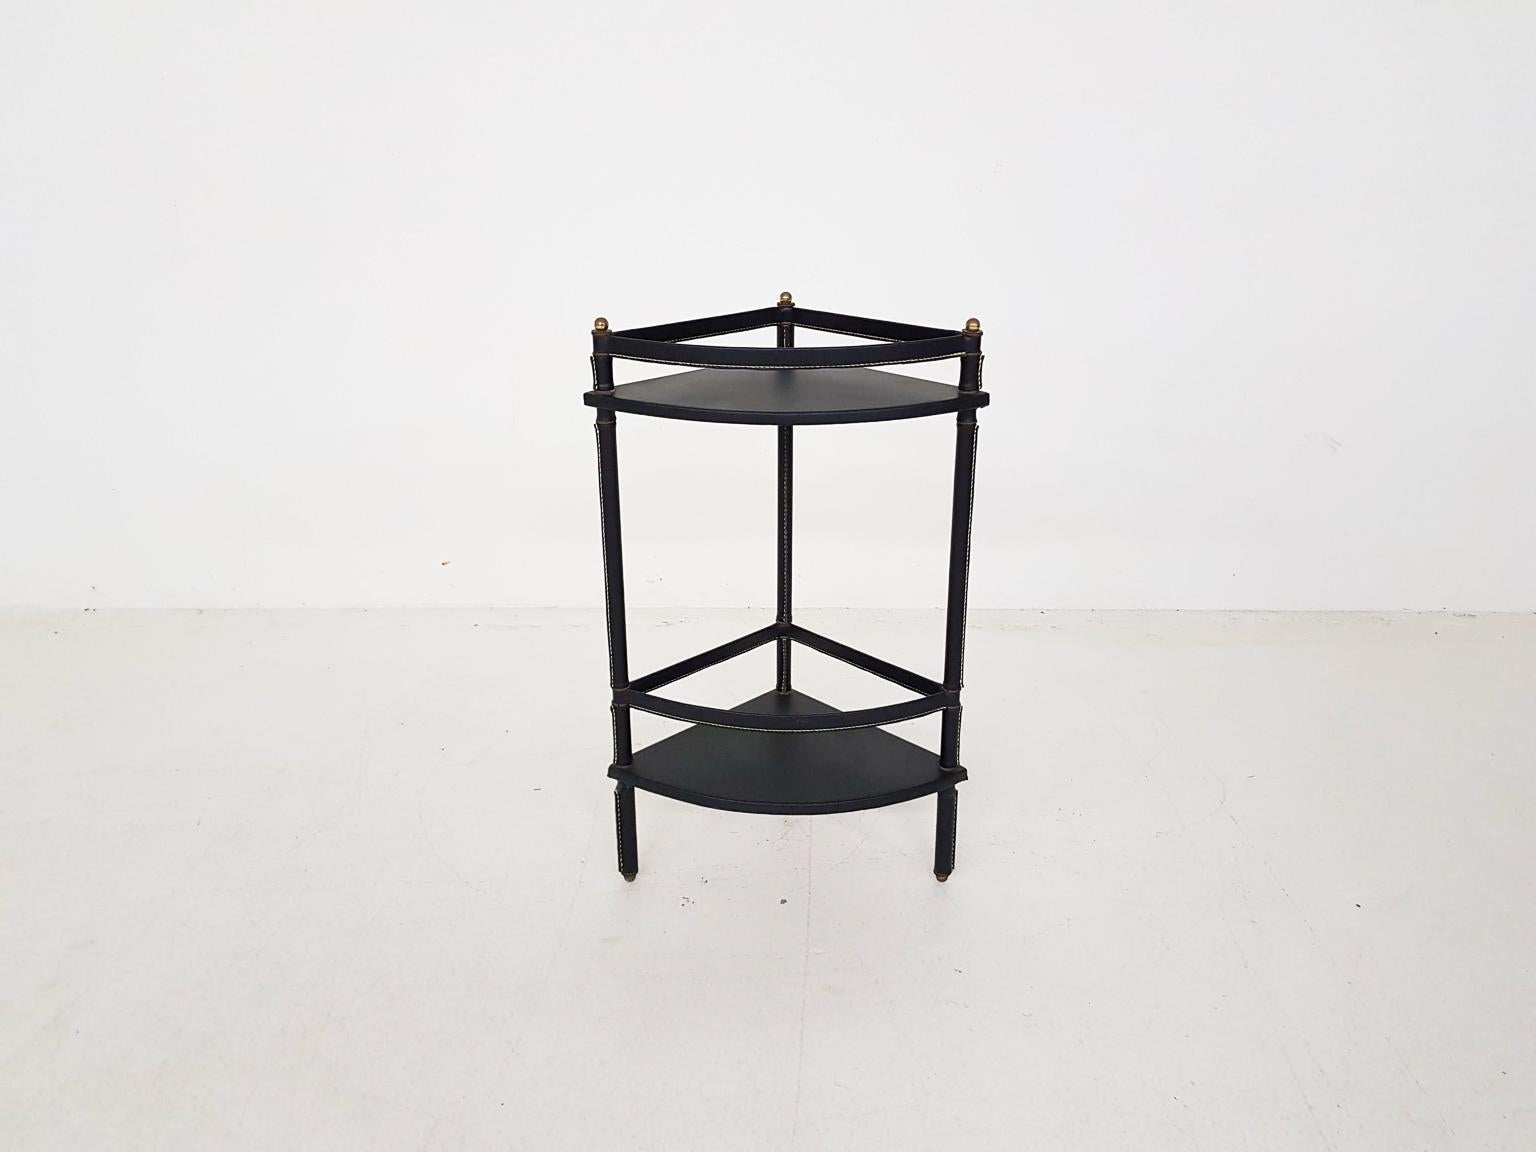 A side or corner table in stitched leather with brass details. Designed by the legendary French luxury designer Jacques Adnet in the midcentury.

This piece is from his stitched leather series which he created in the 1950s. This series consisted